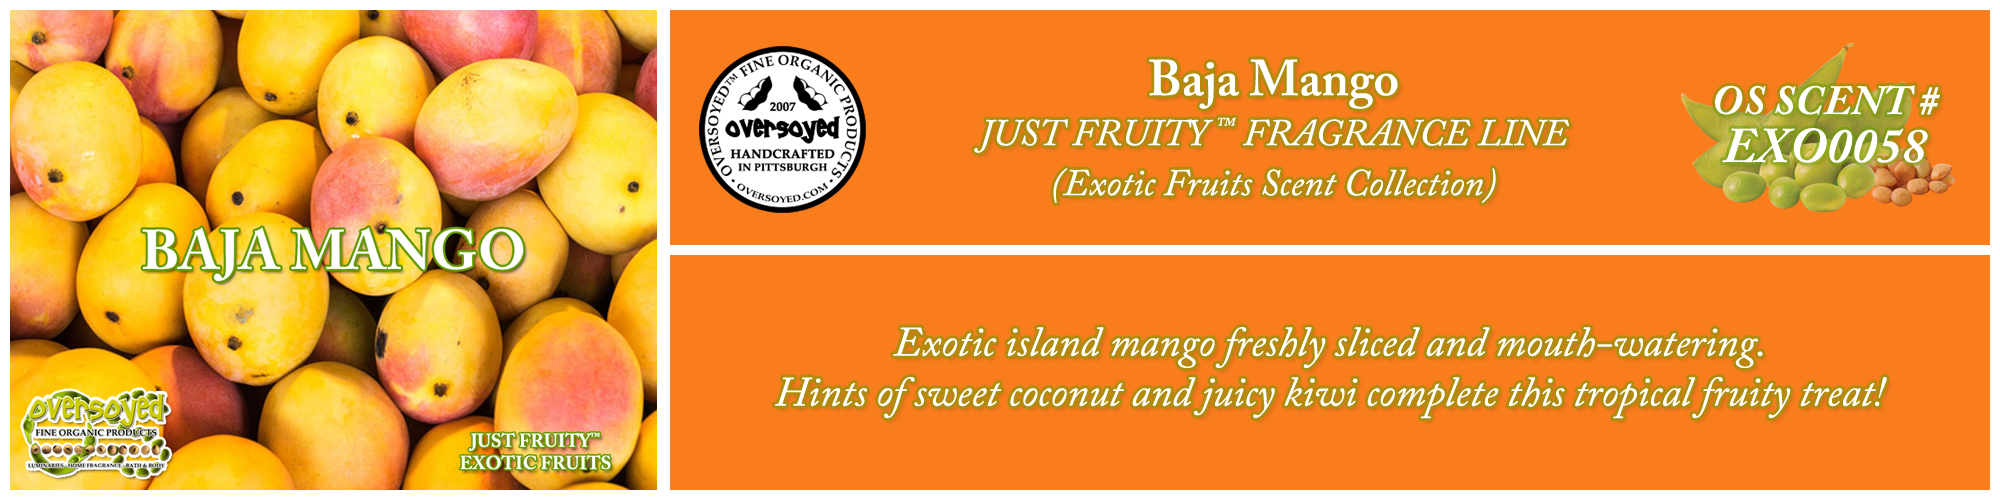 Baja Mango Handcrafted Products Collection